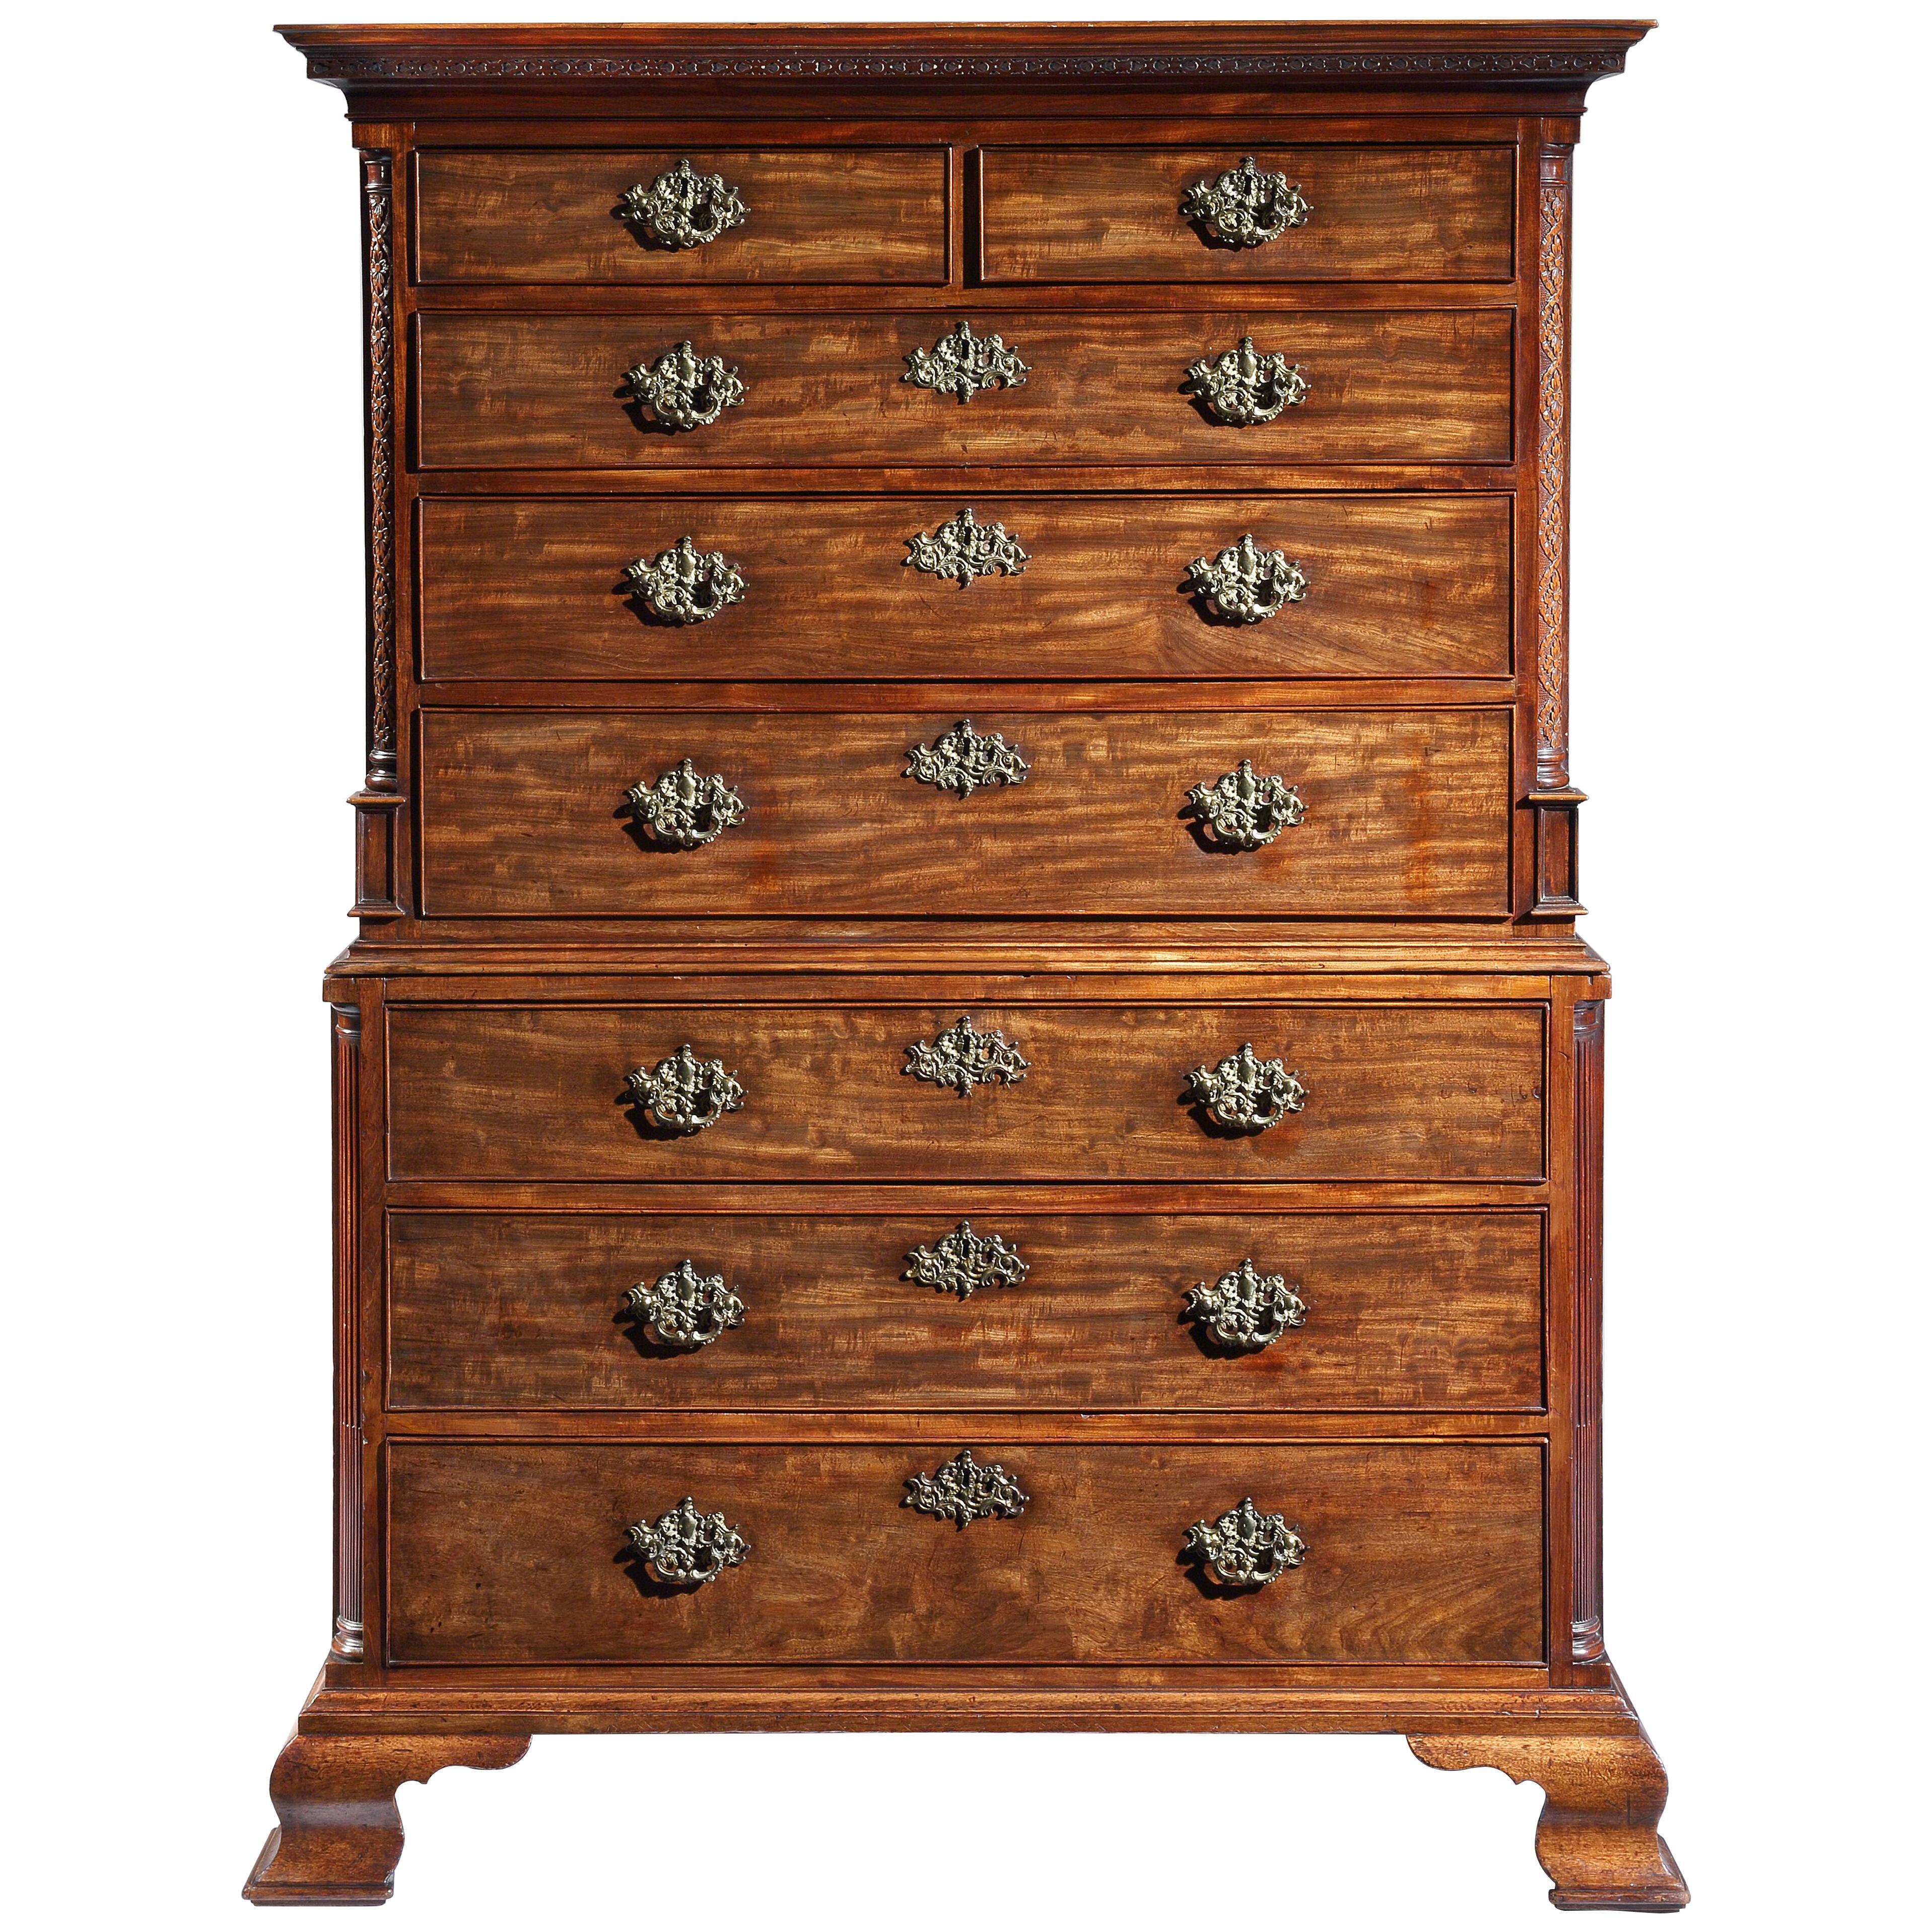 A Fine George III Period Mahogany Chest on Chest